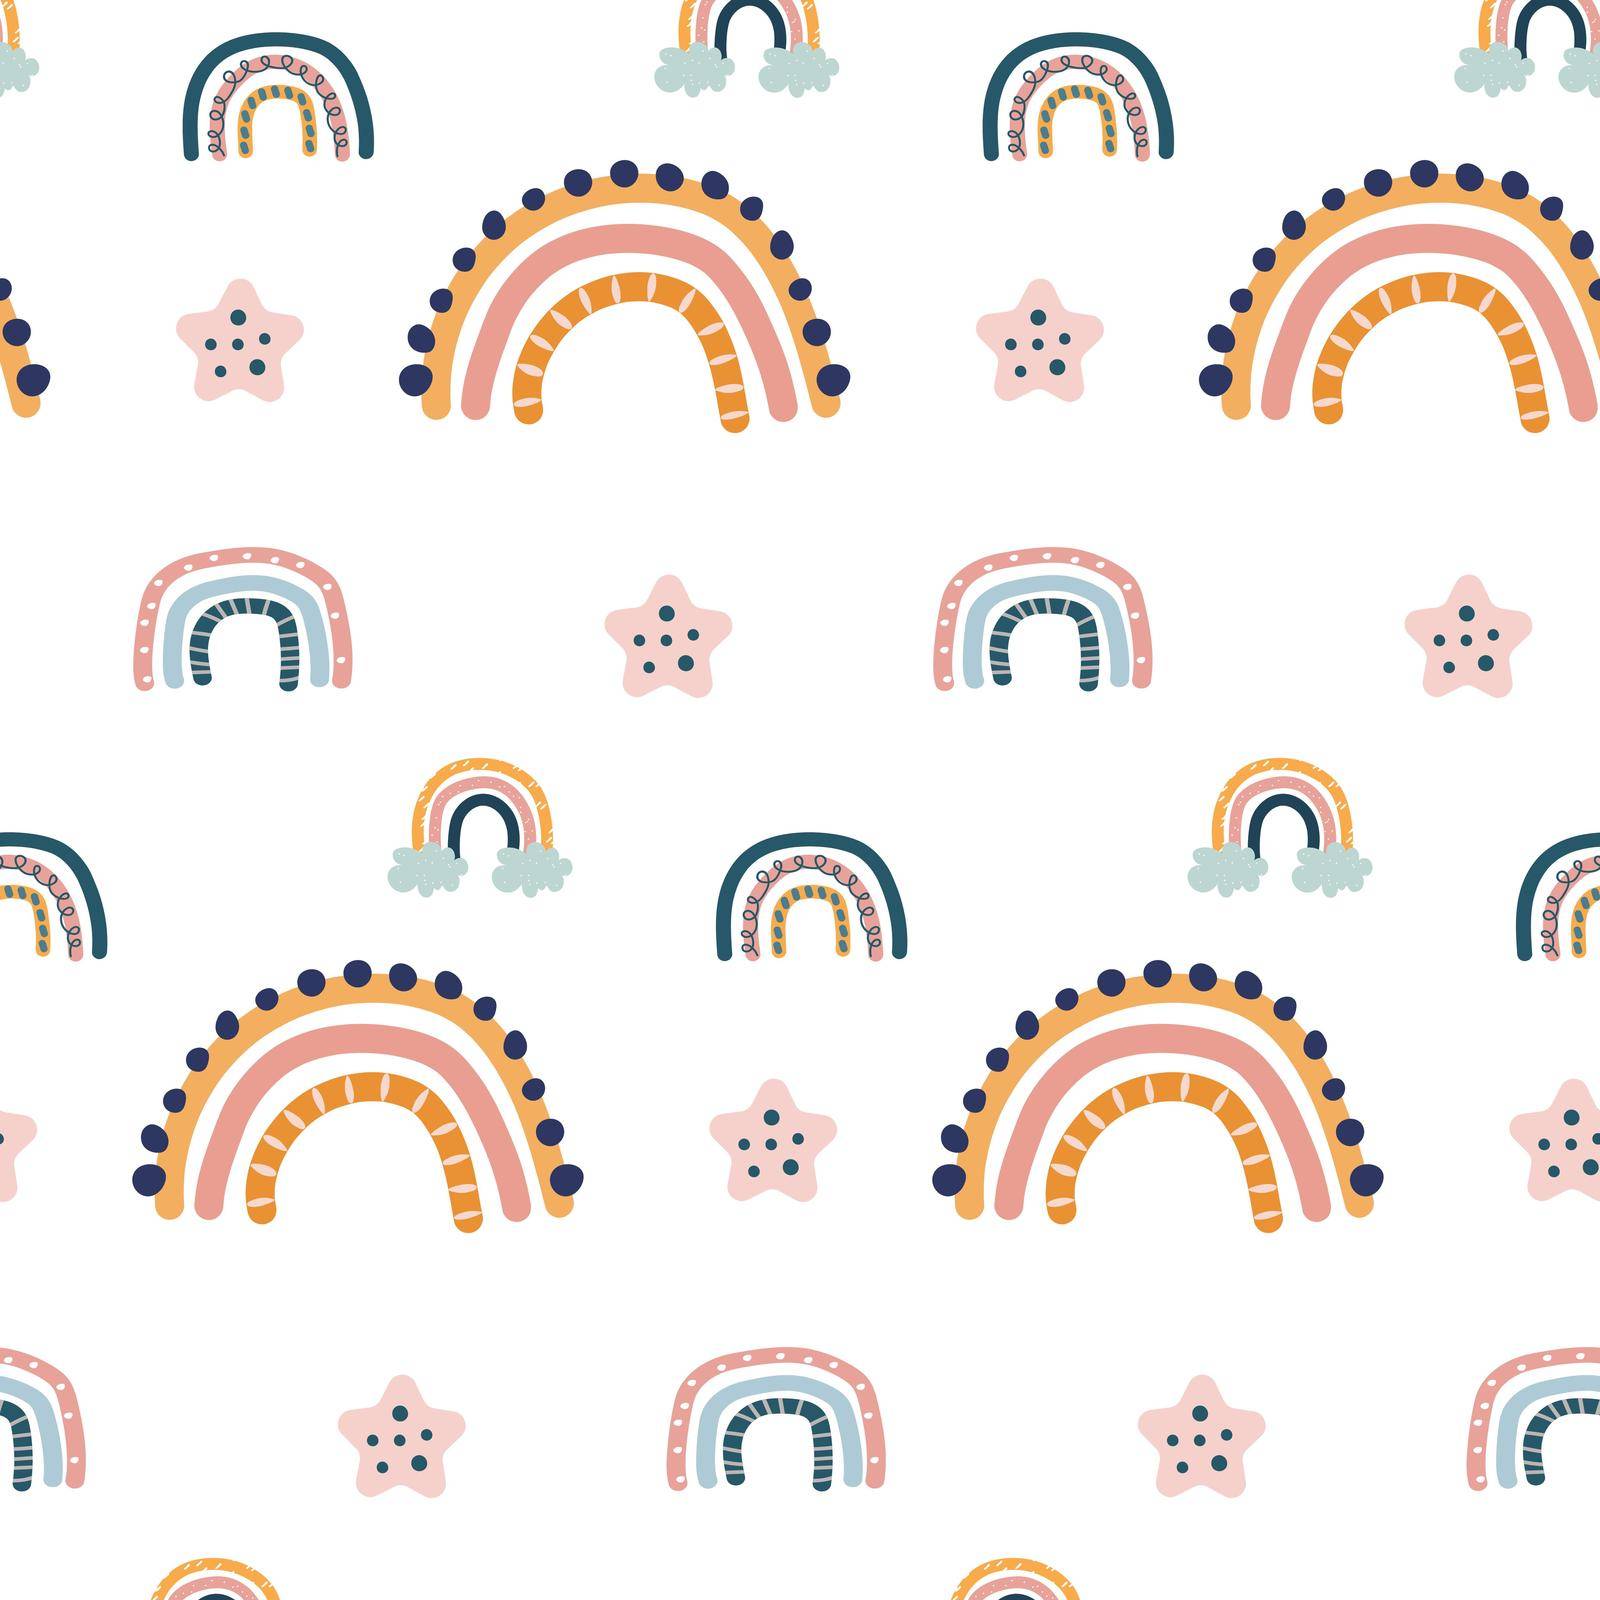 Rainbow and cloud seamless pattern with orange and grey sky weather elements. Nature atmosphere art illustration for kids fabric and decoration